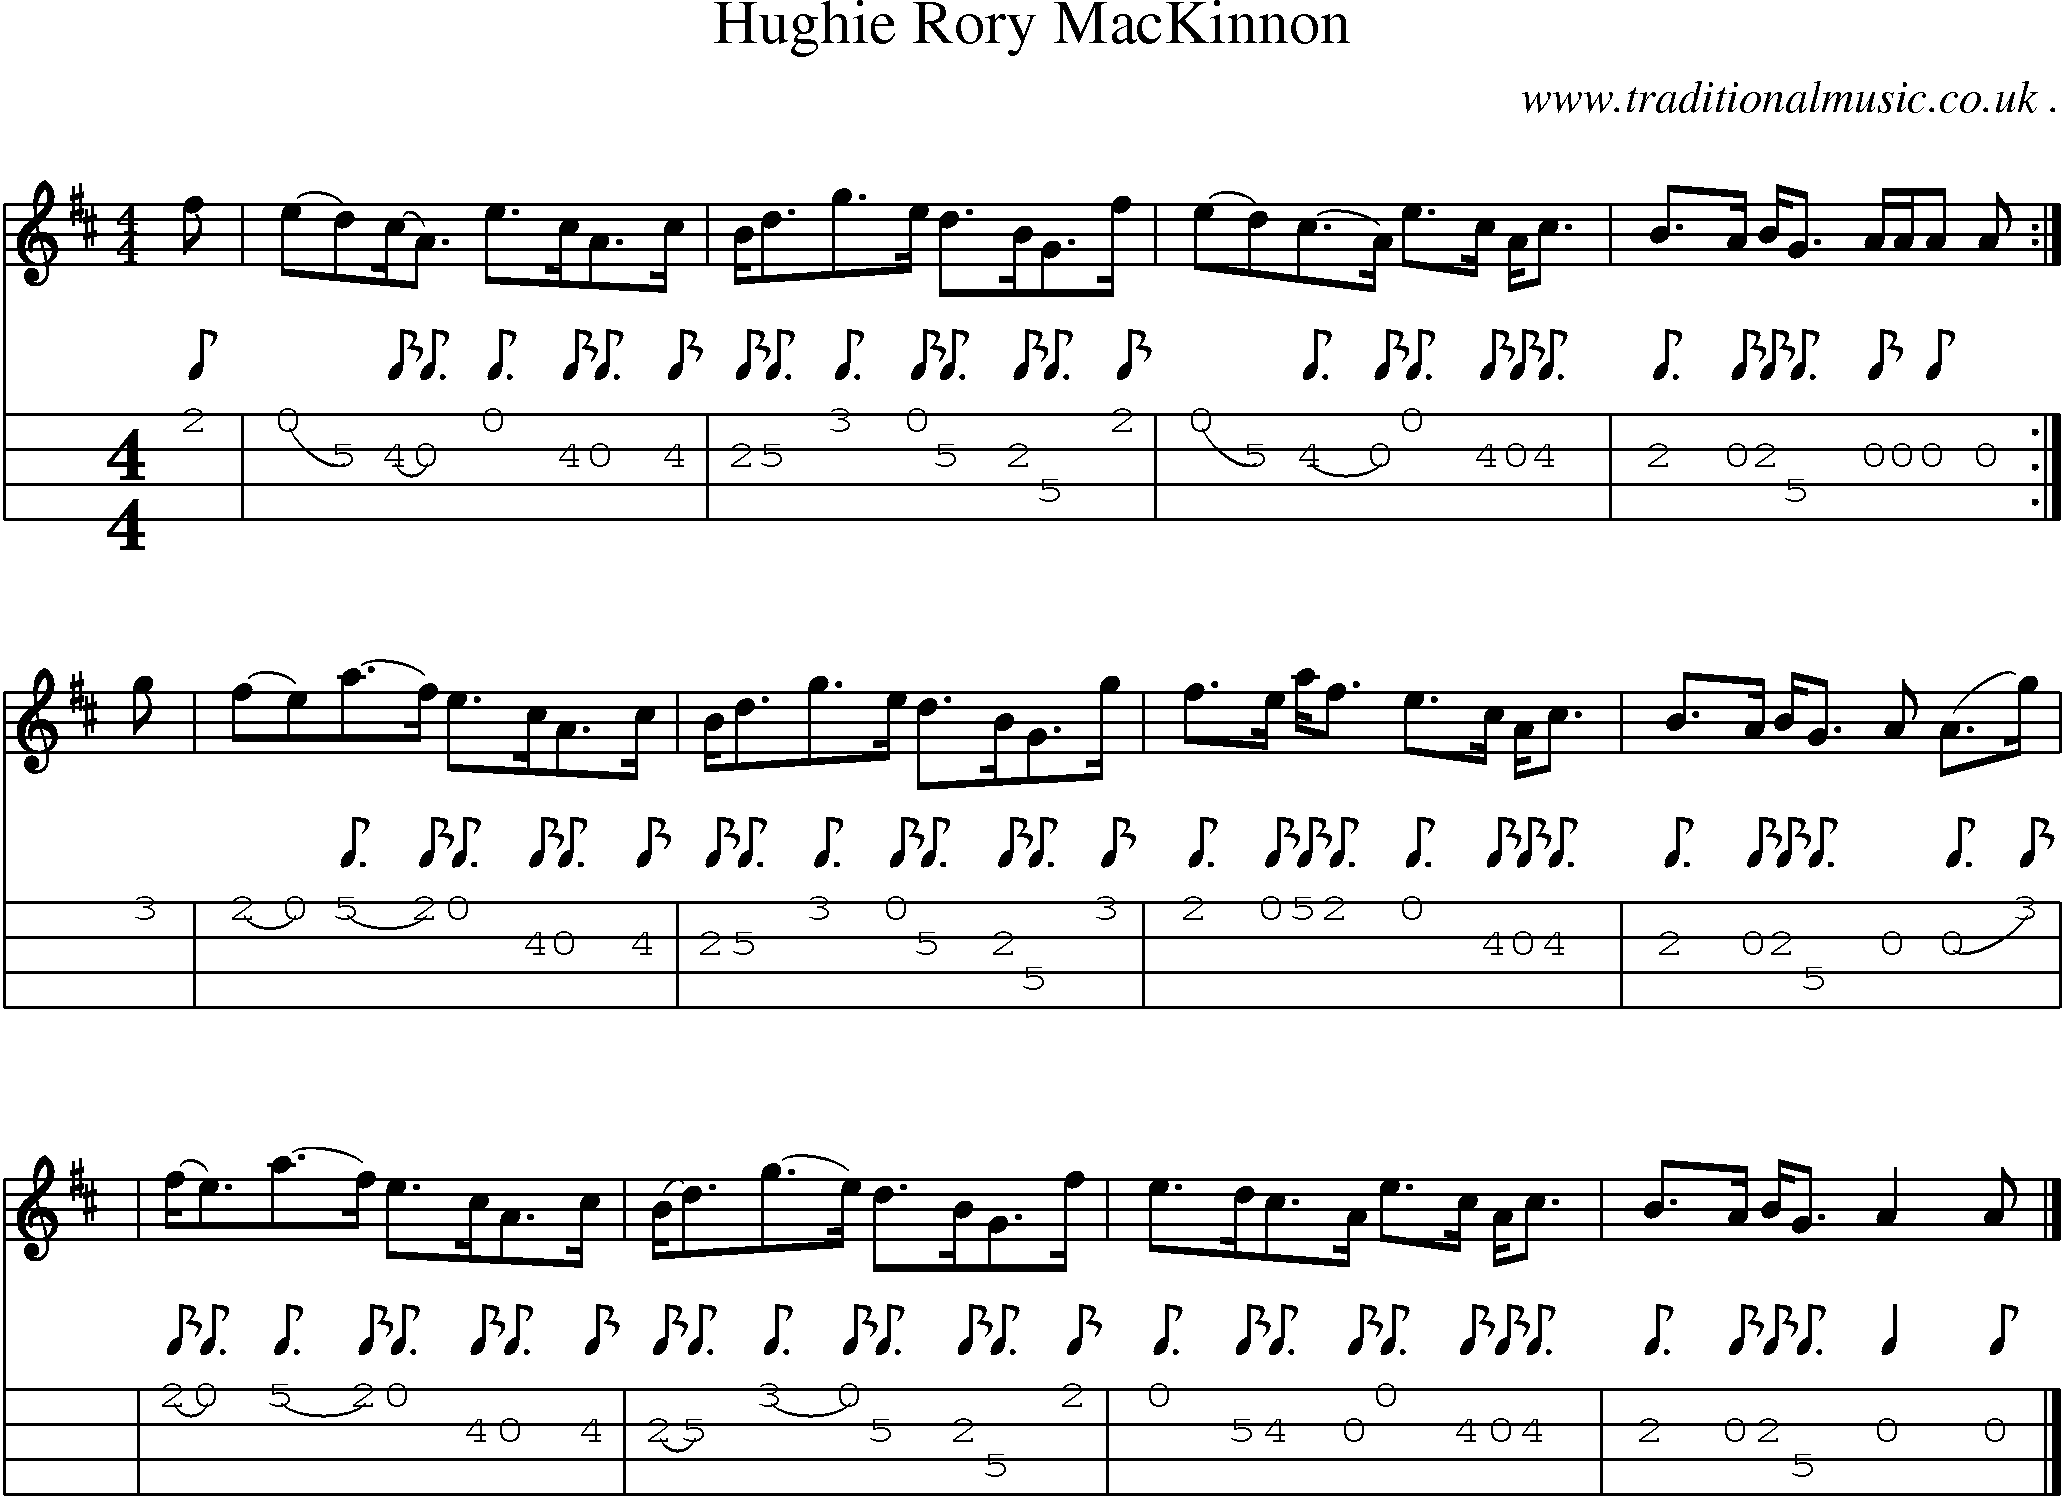 Sheet-music  score, Chords and Mandolin Tabs for Hughie Rory Mackinnon